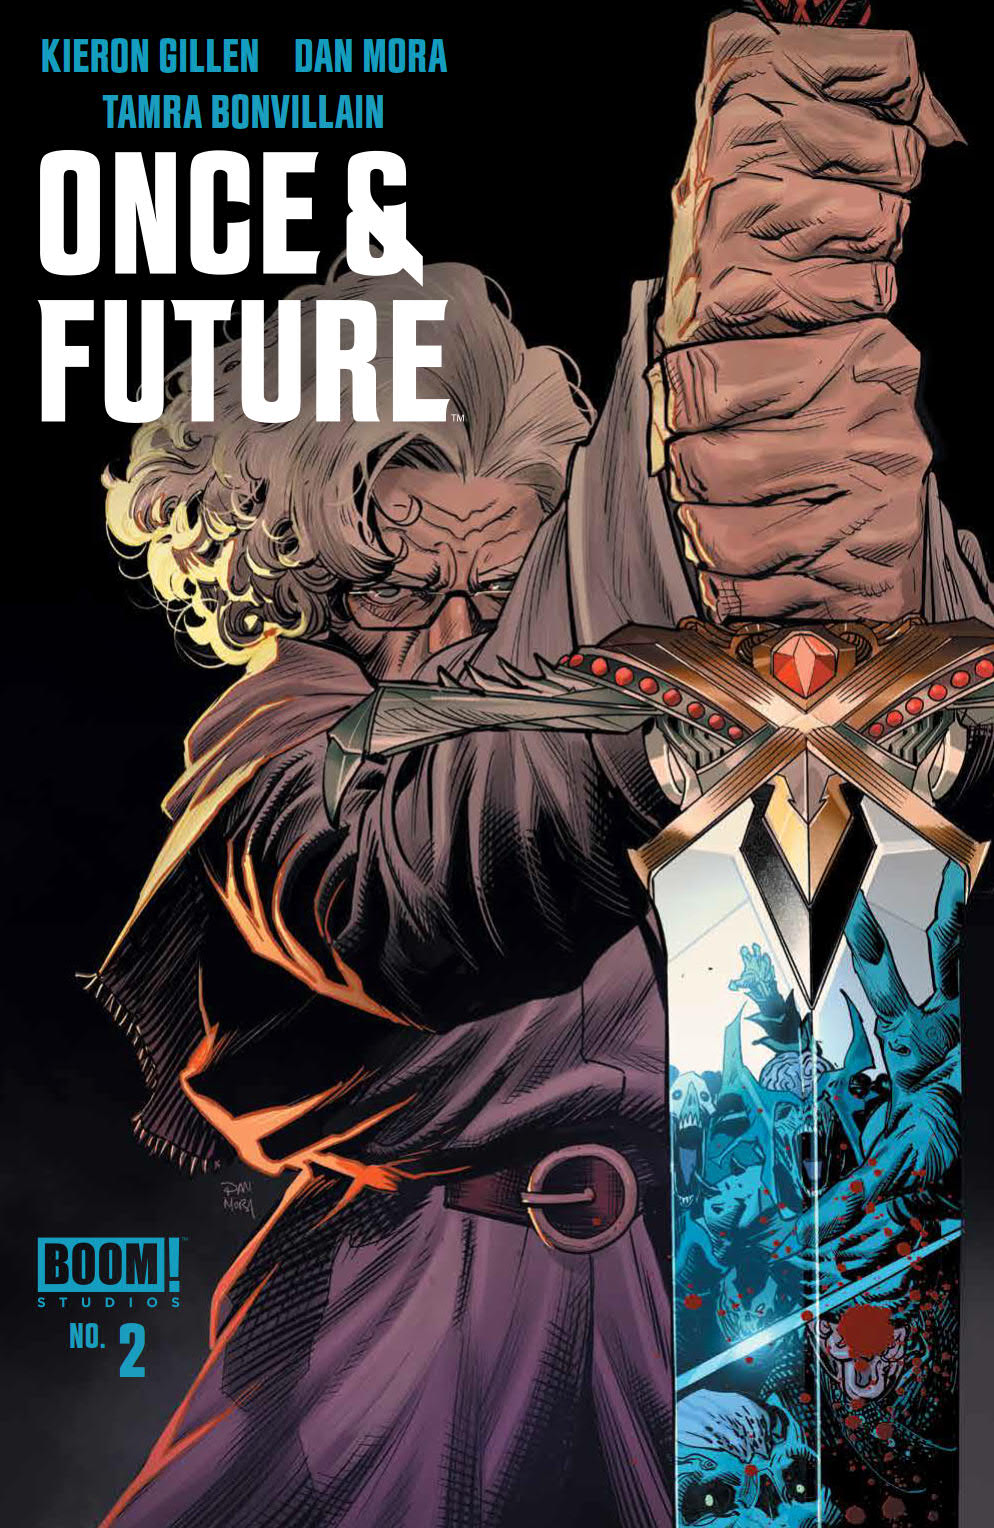 Once and Future #2 review: King Arthur